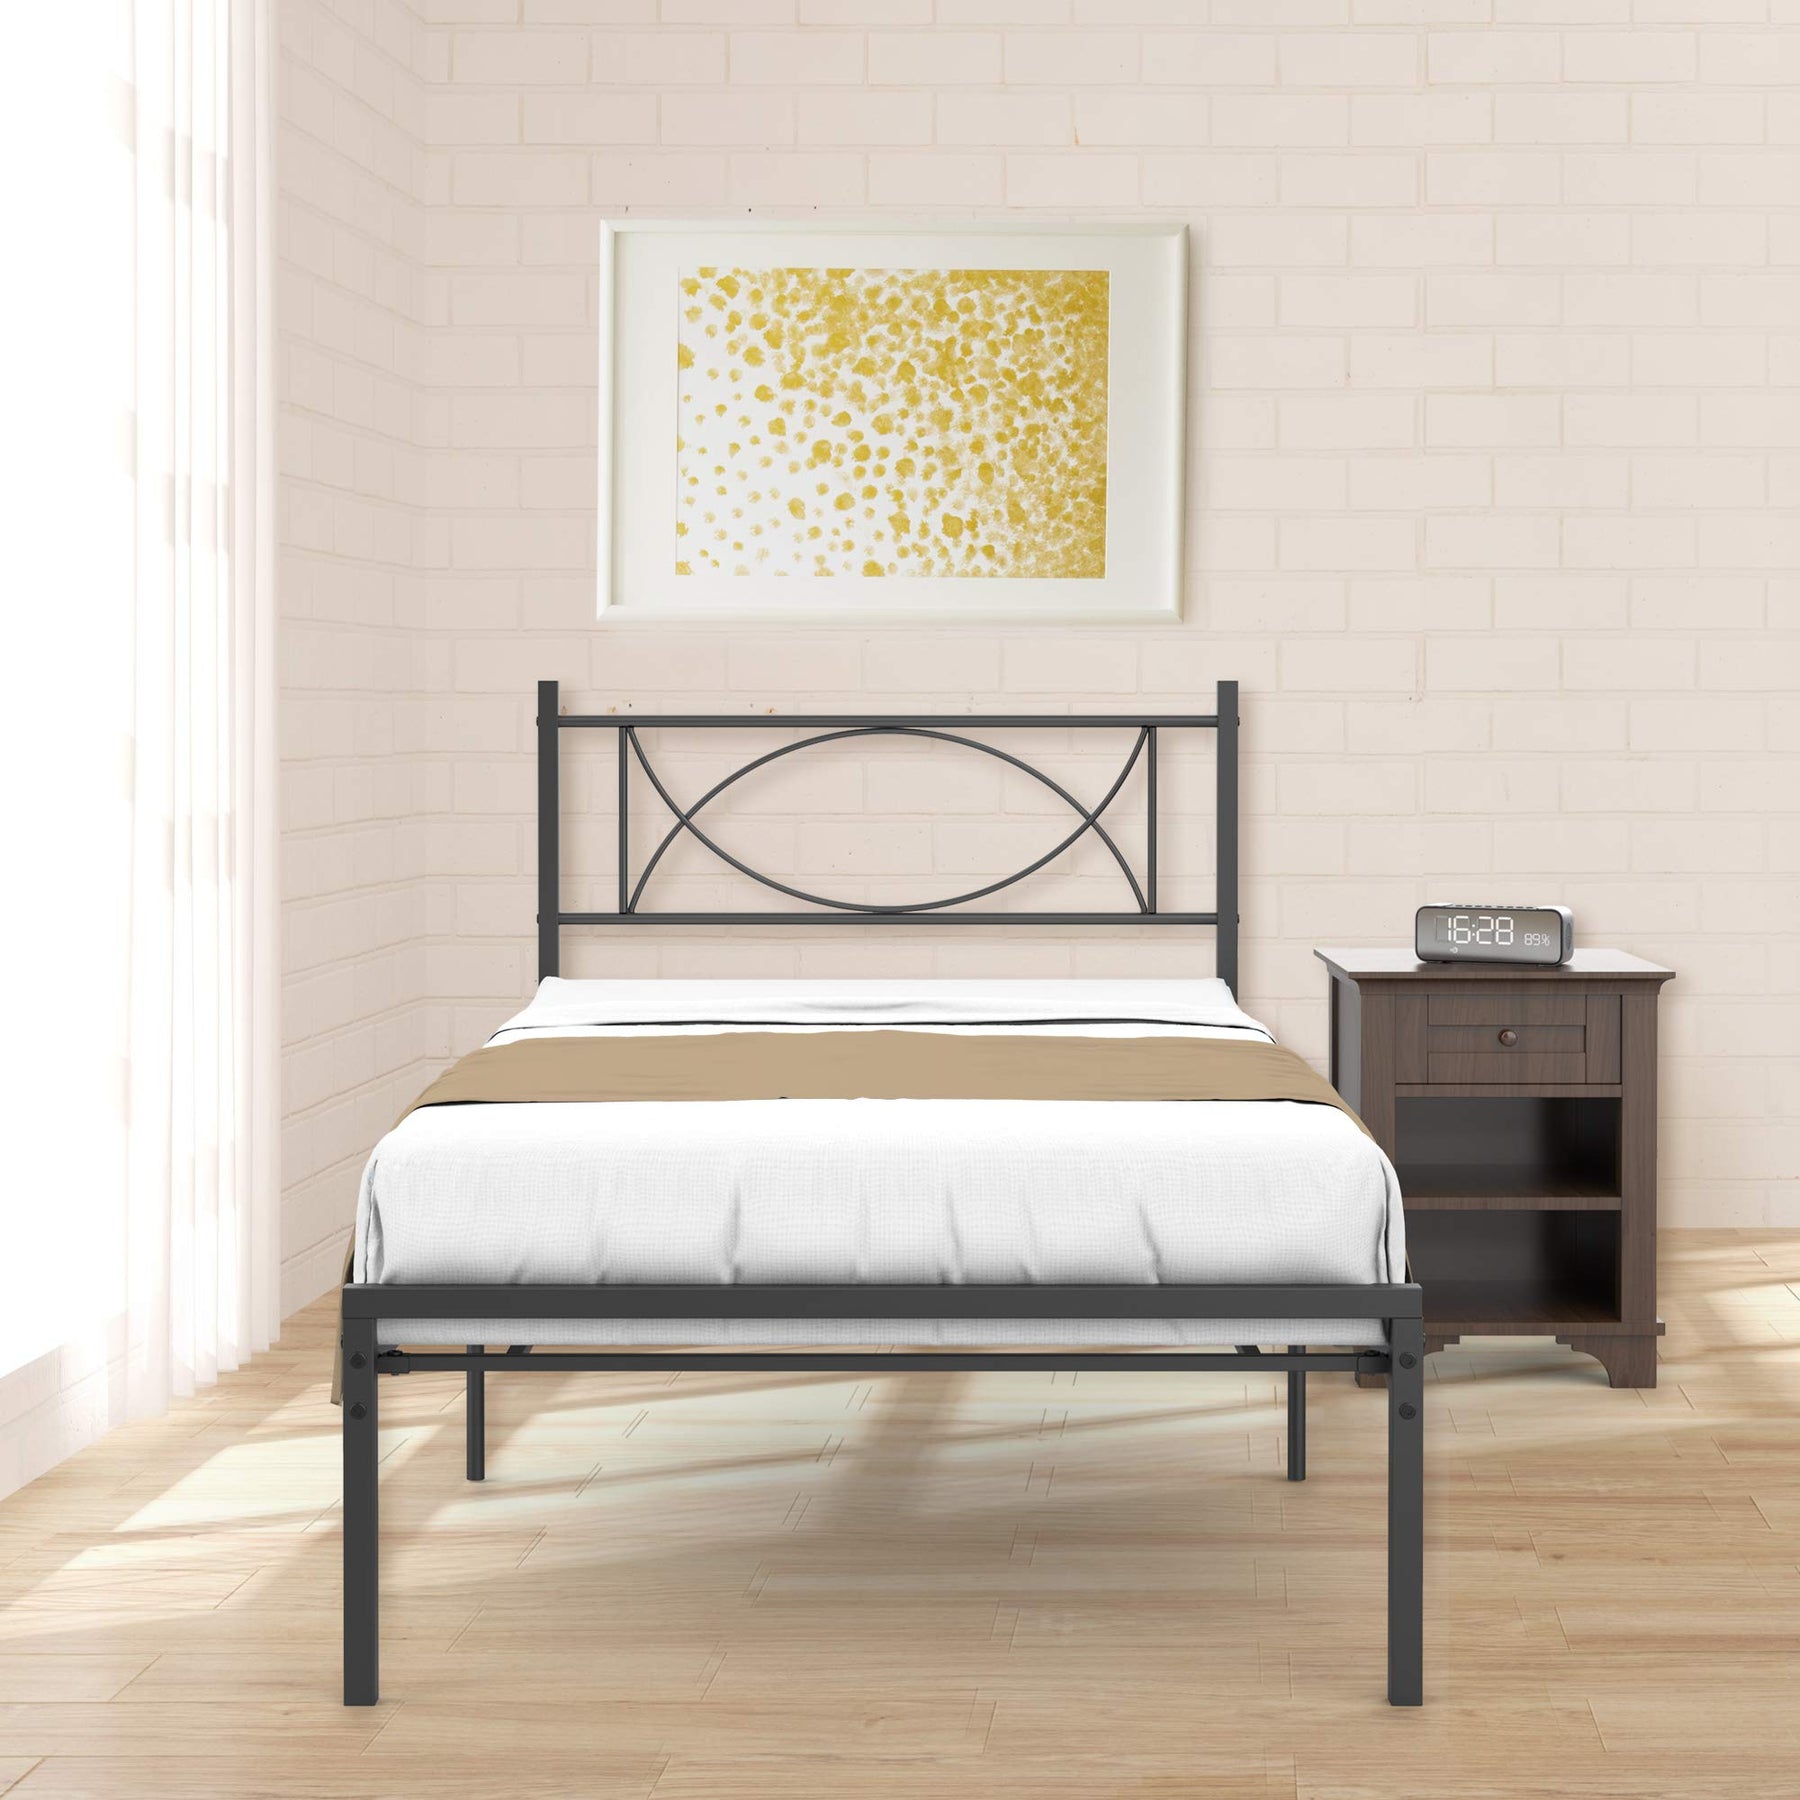 IDEALHOUSE Metal Platform Bed Frame with Sturdy Steel Bed Slats - Twin Size